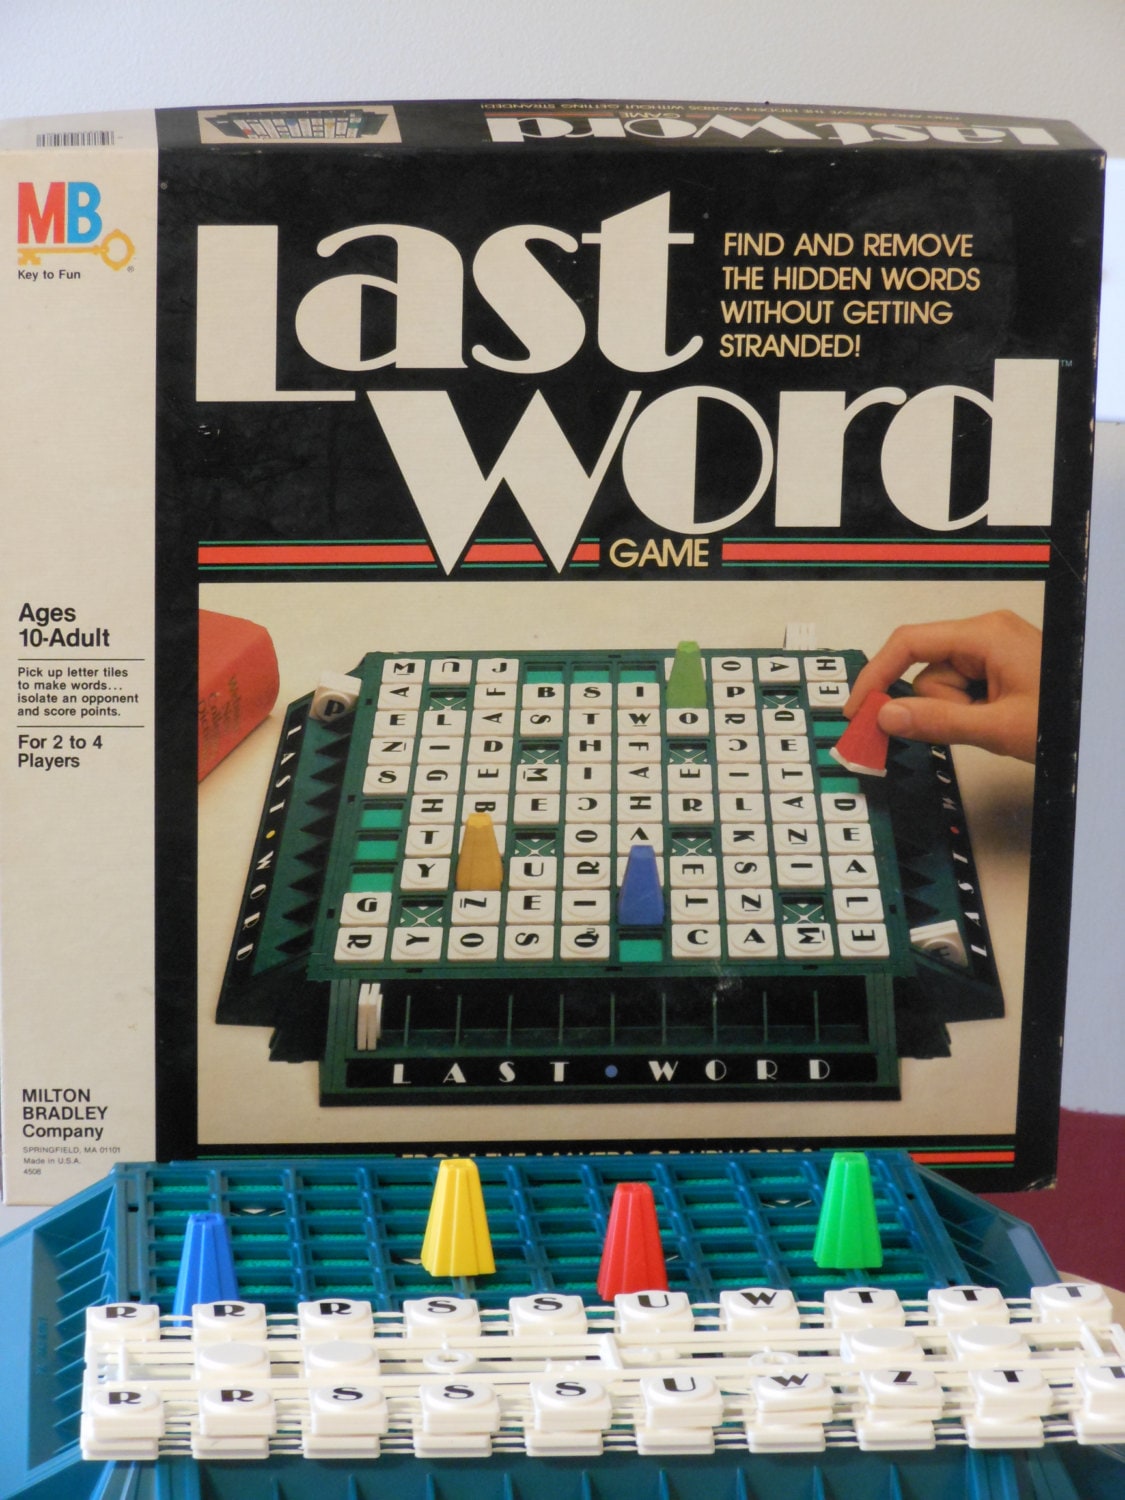 Last word game instructions